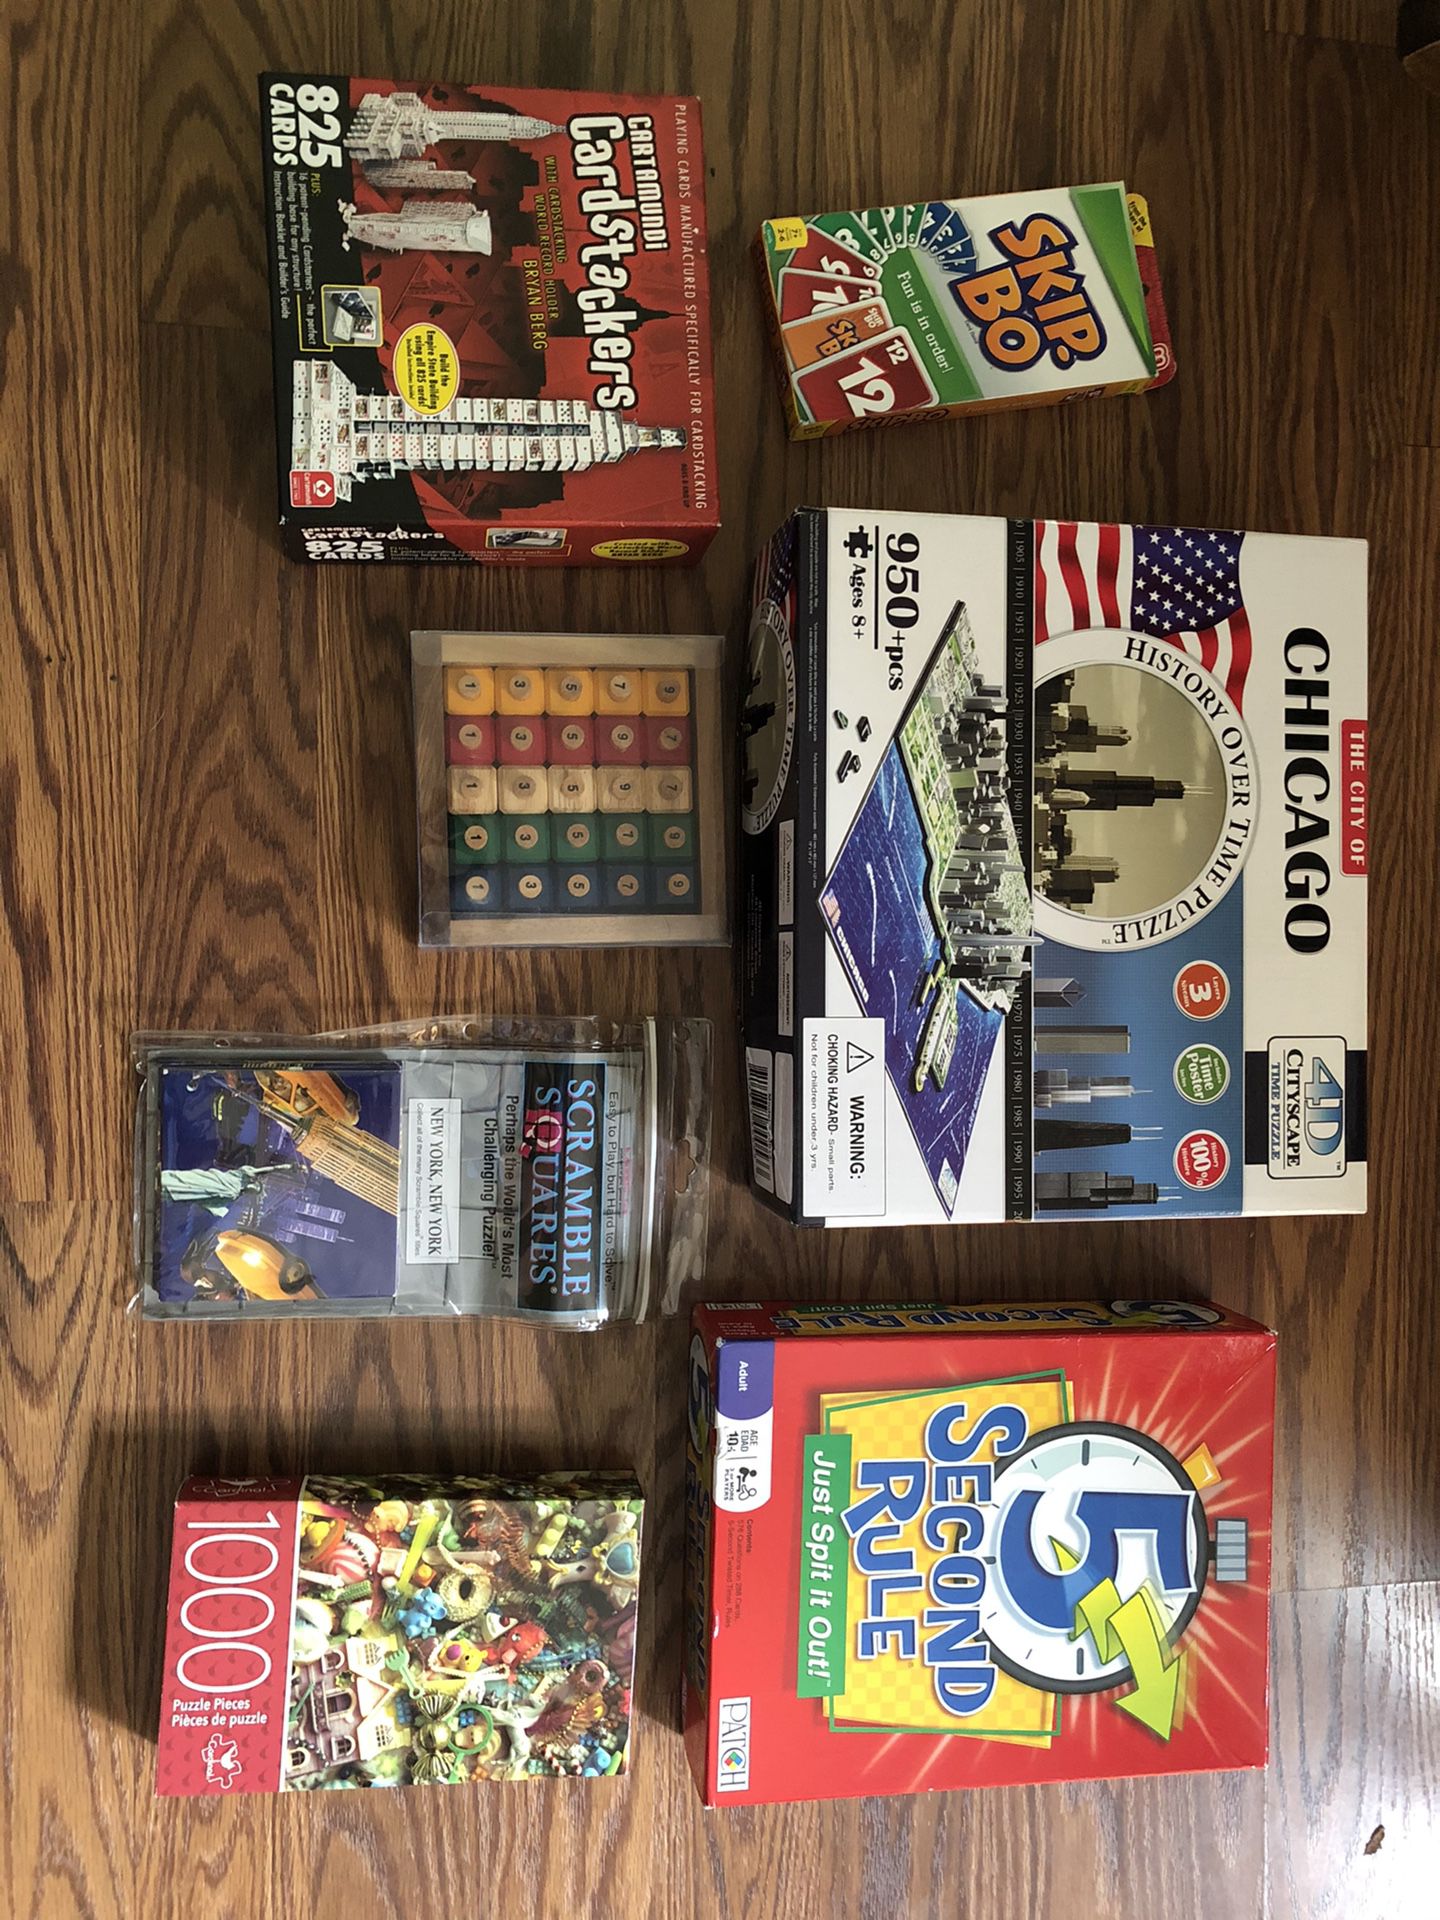 (7) Games and puzzles - Bartlett, IL